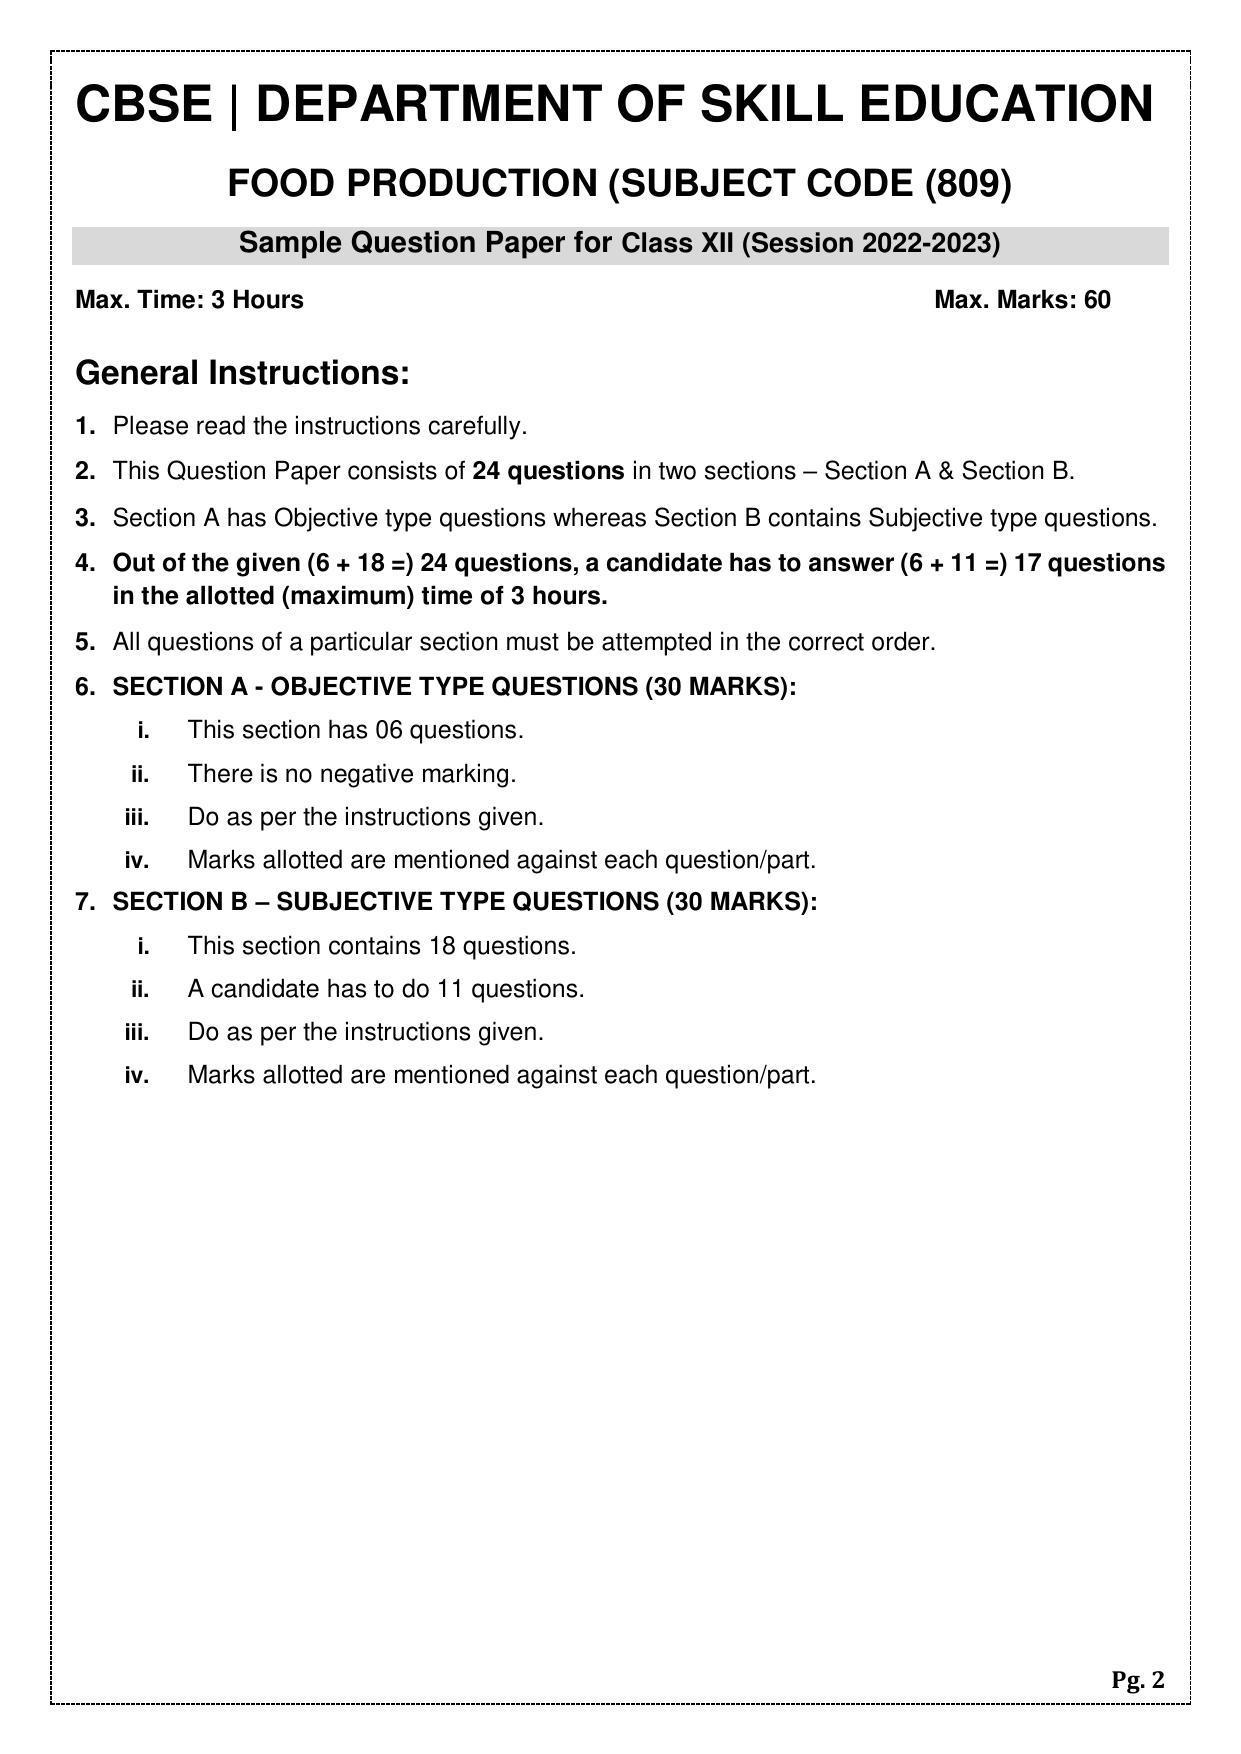 CBSE Class 12 Food Production (Skill Education) Sample Papers 2023 - Page 2